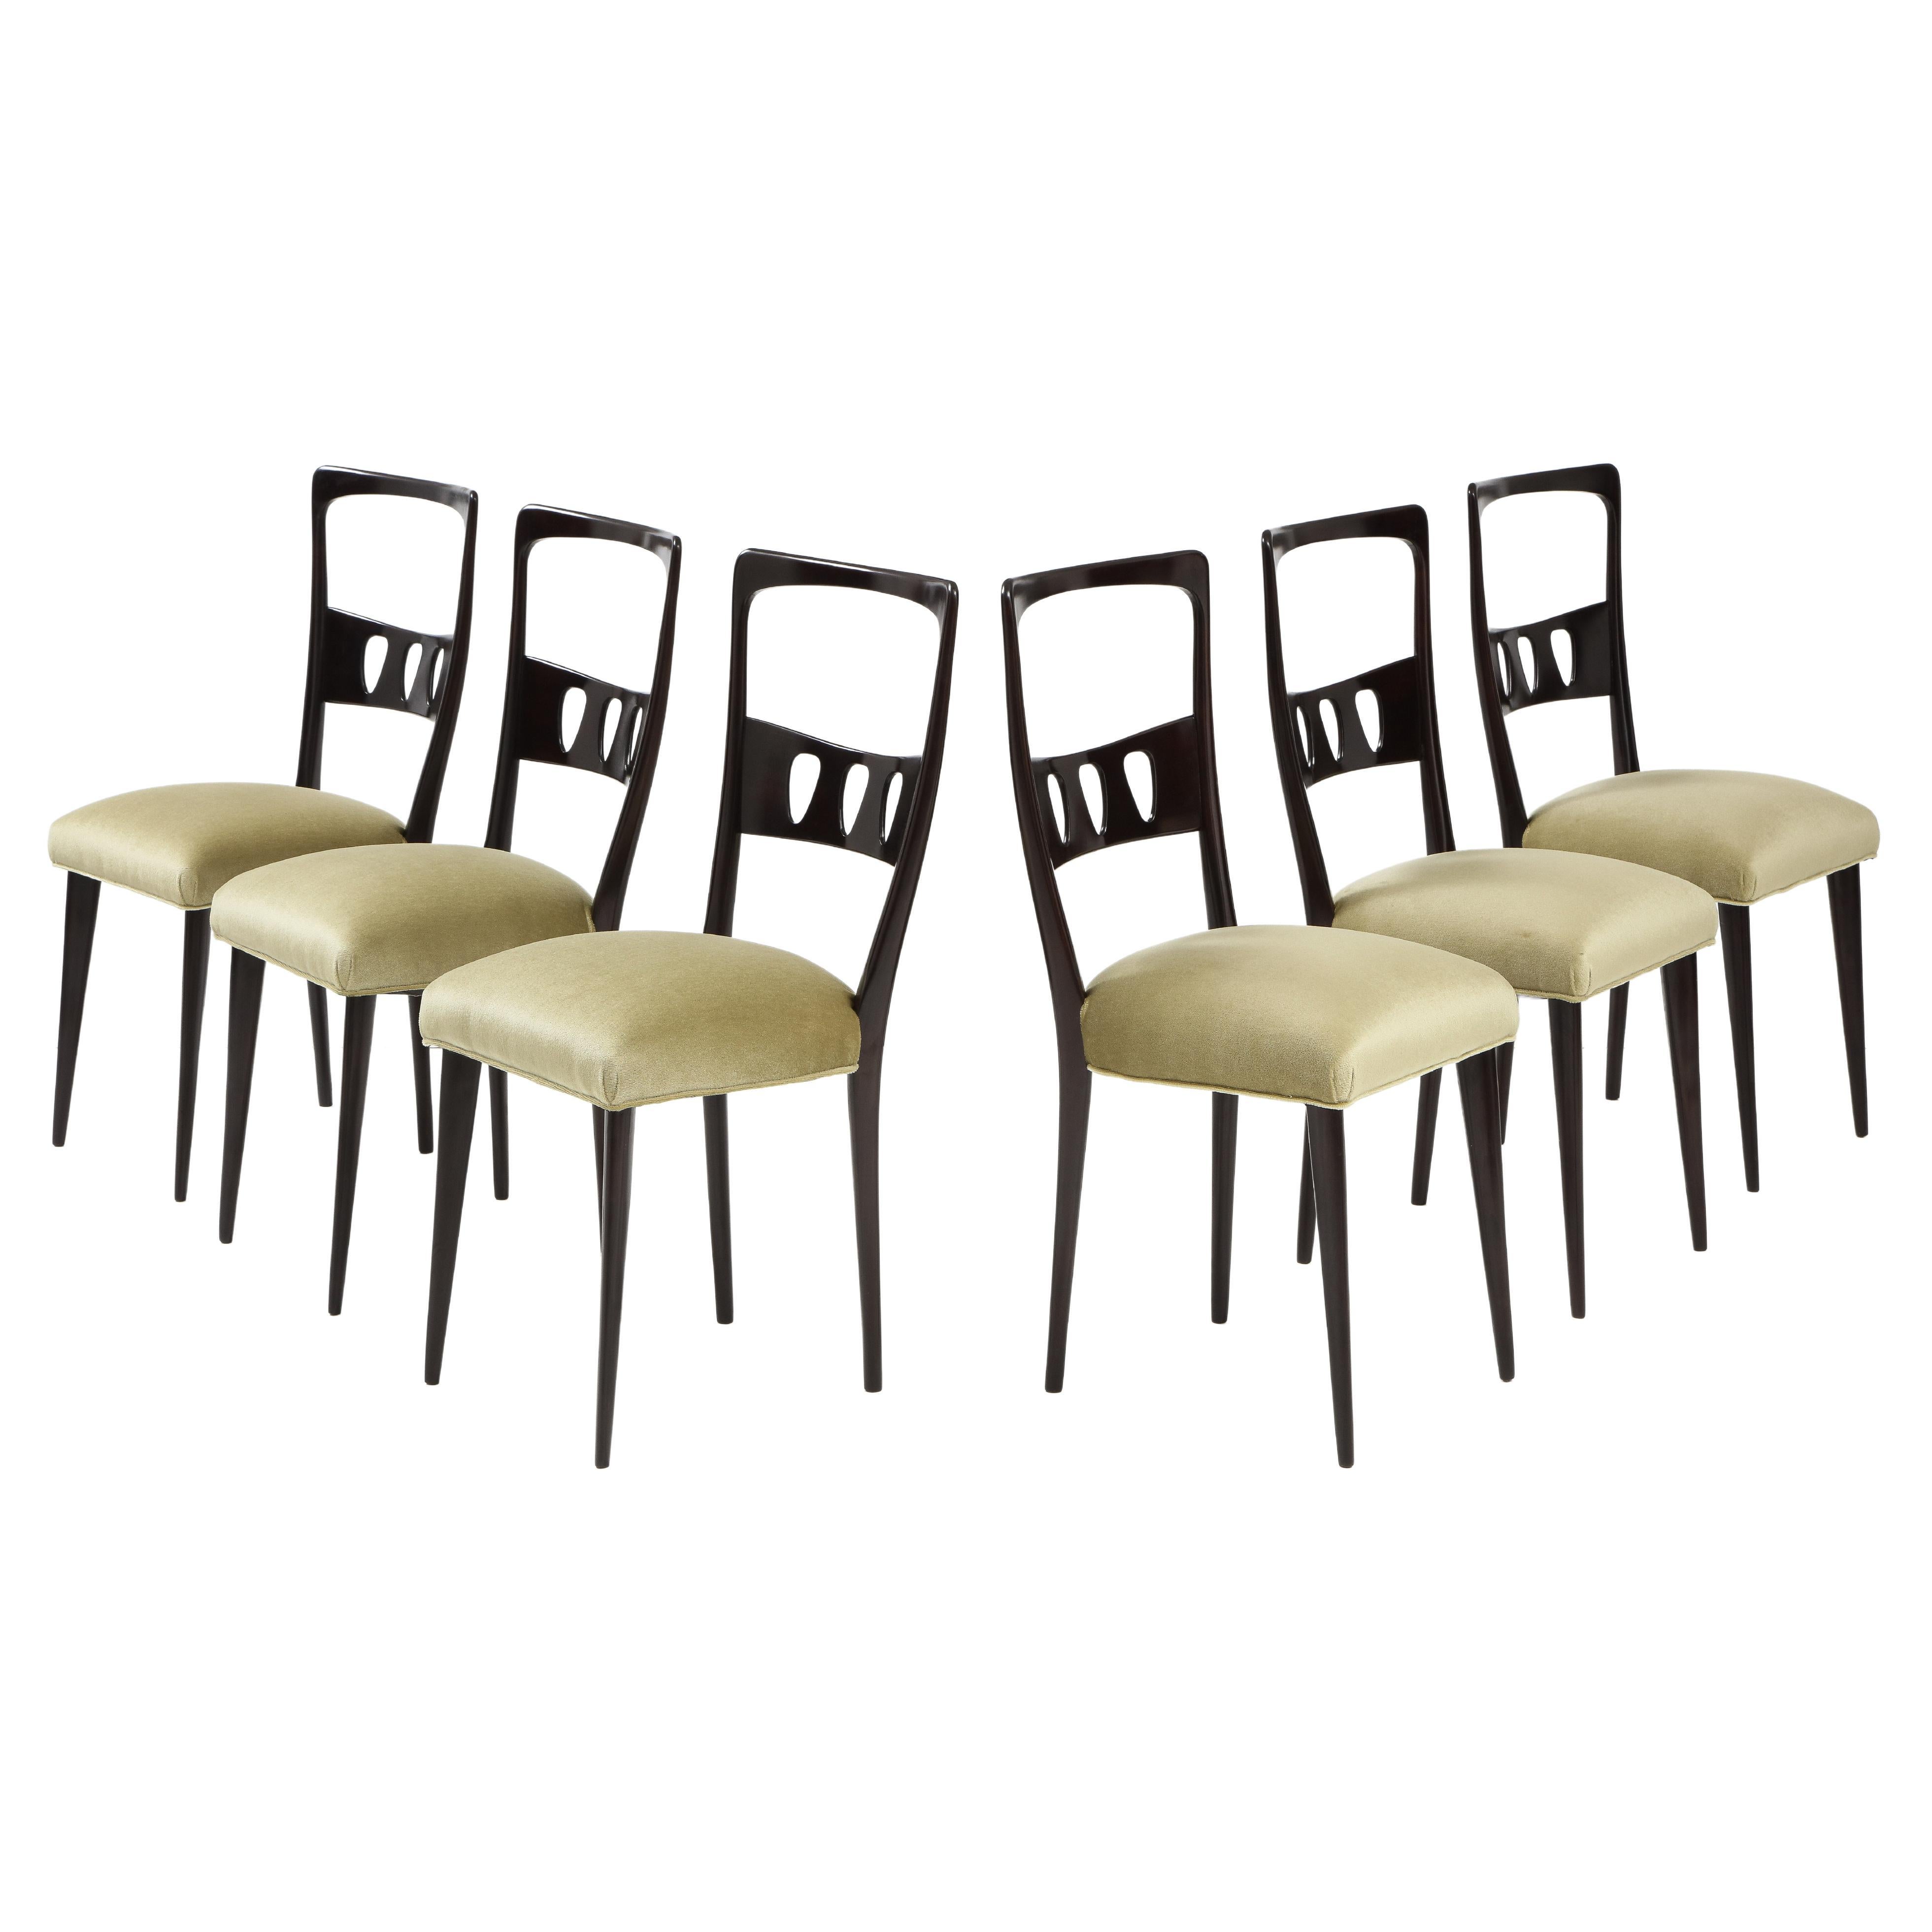 1950's Modernist High Back Italian Dining Chairs Set of 6